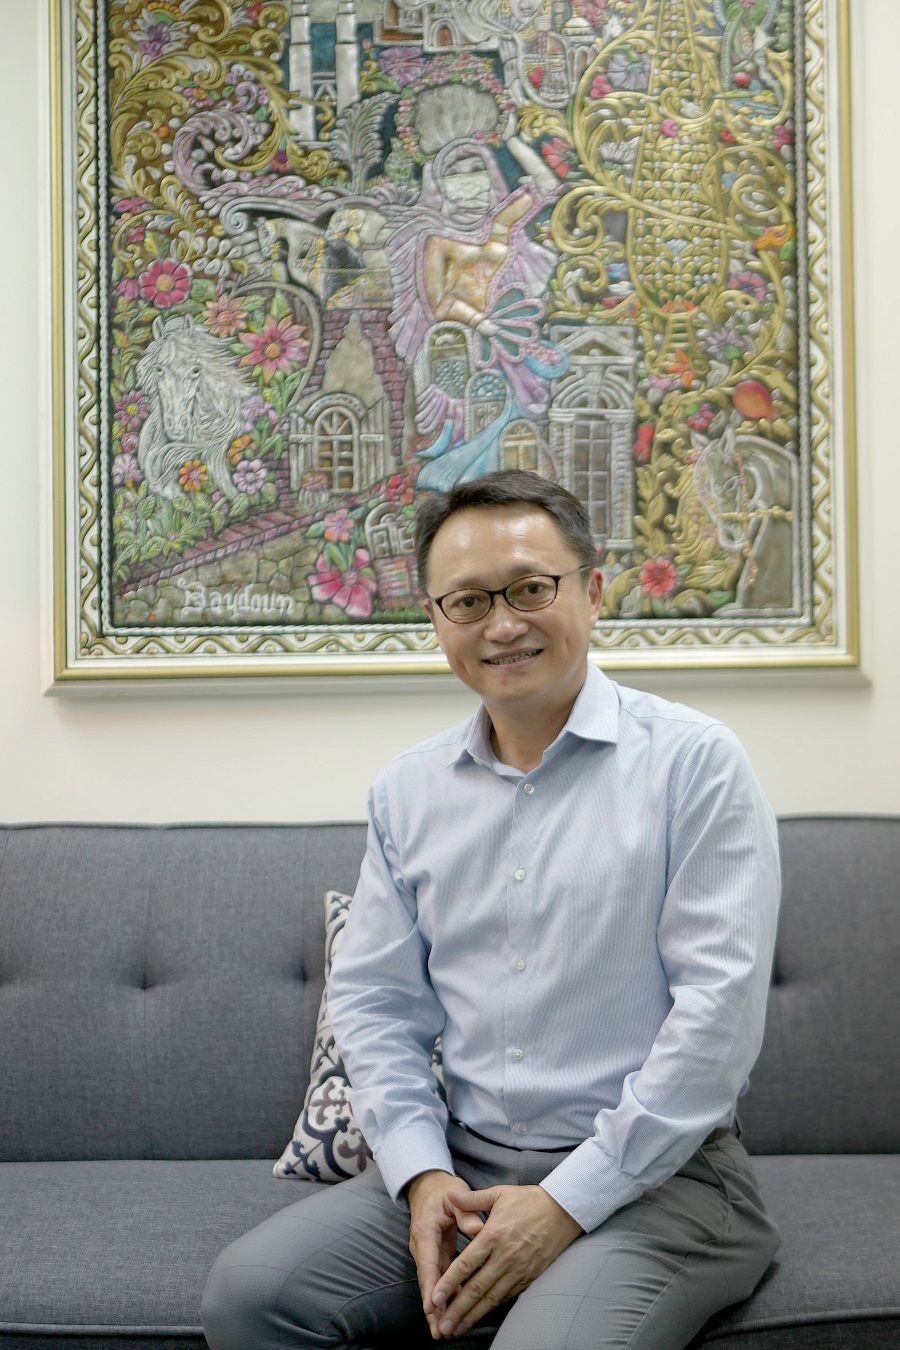 Li Foundation founder Lionel Li. (Photo provided by interviewee)